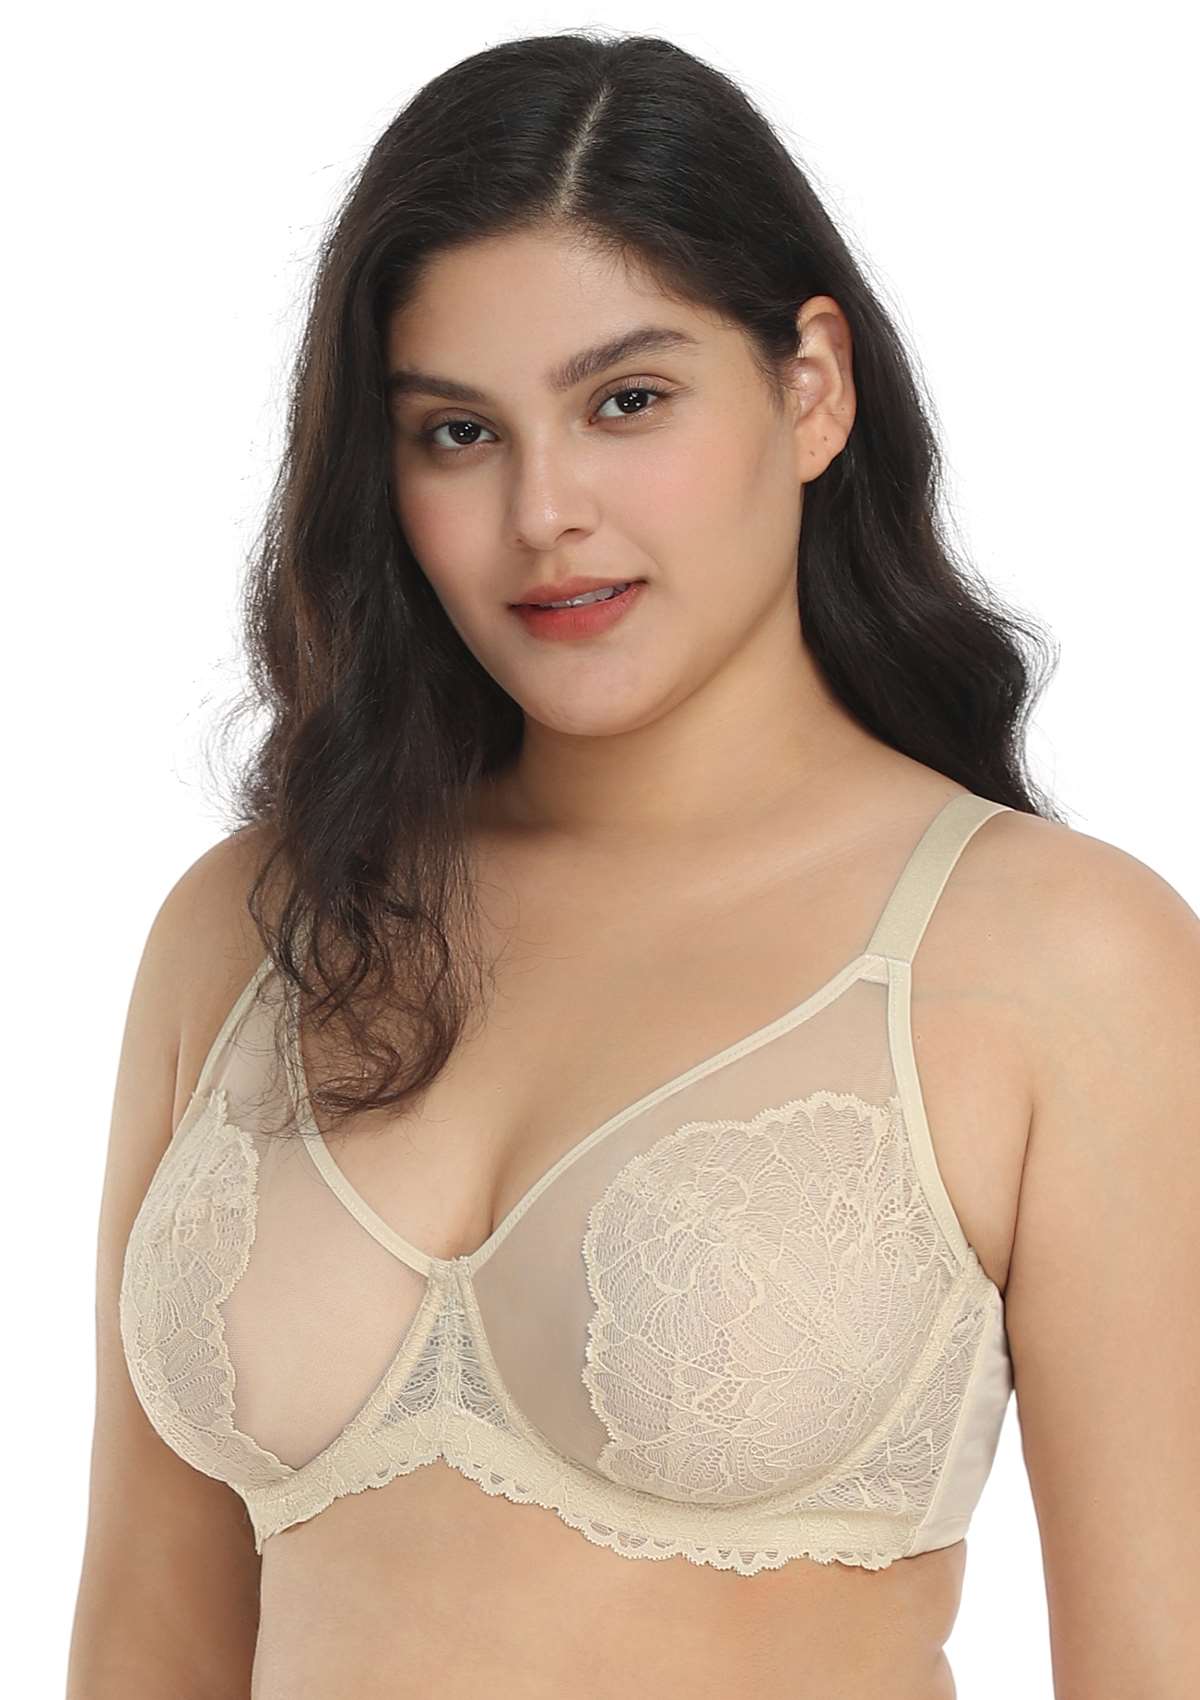 HSIA Blossom Full Coverage Side Support Bra: Designed For Heavy Busts - Beige / 38 / C